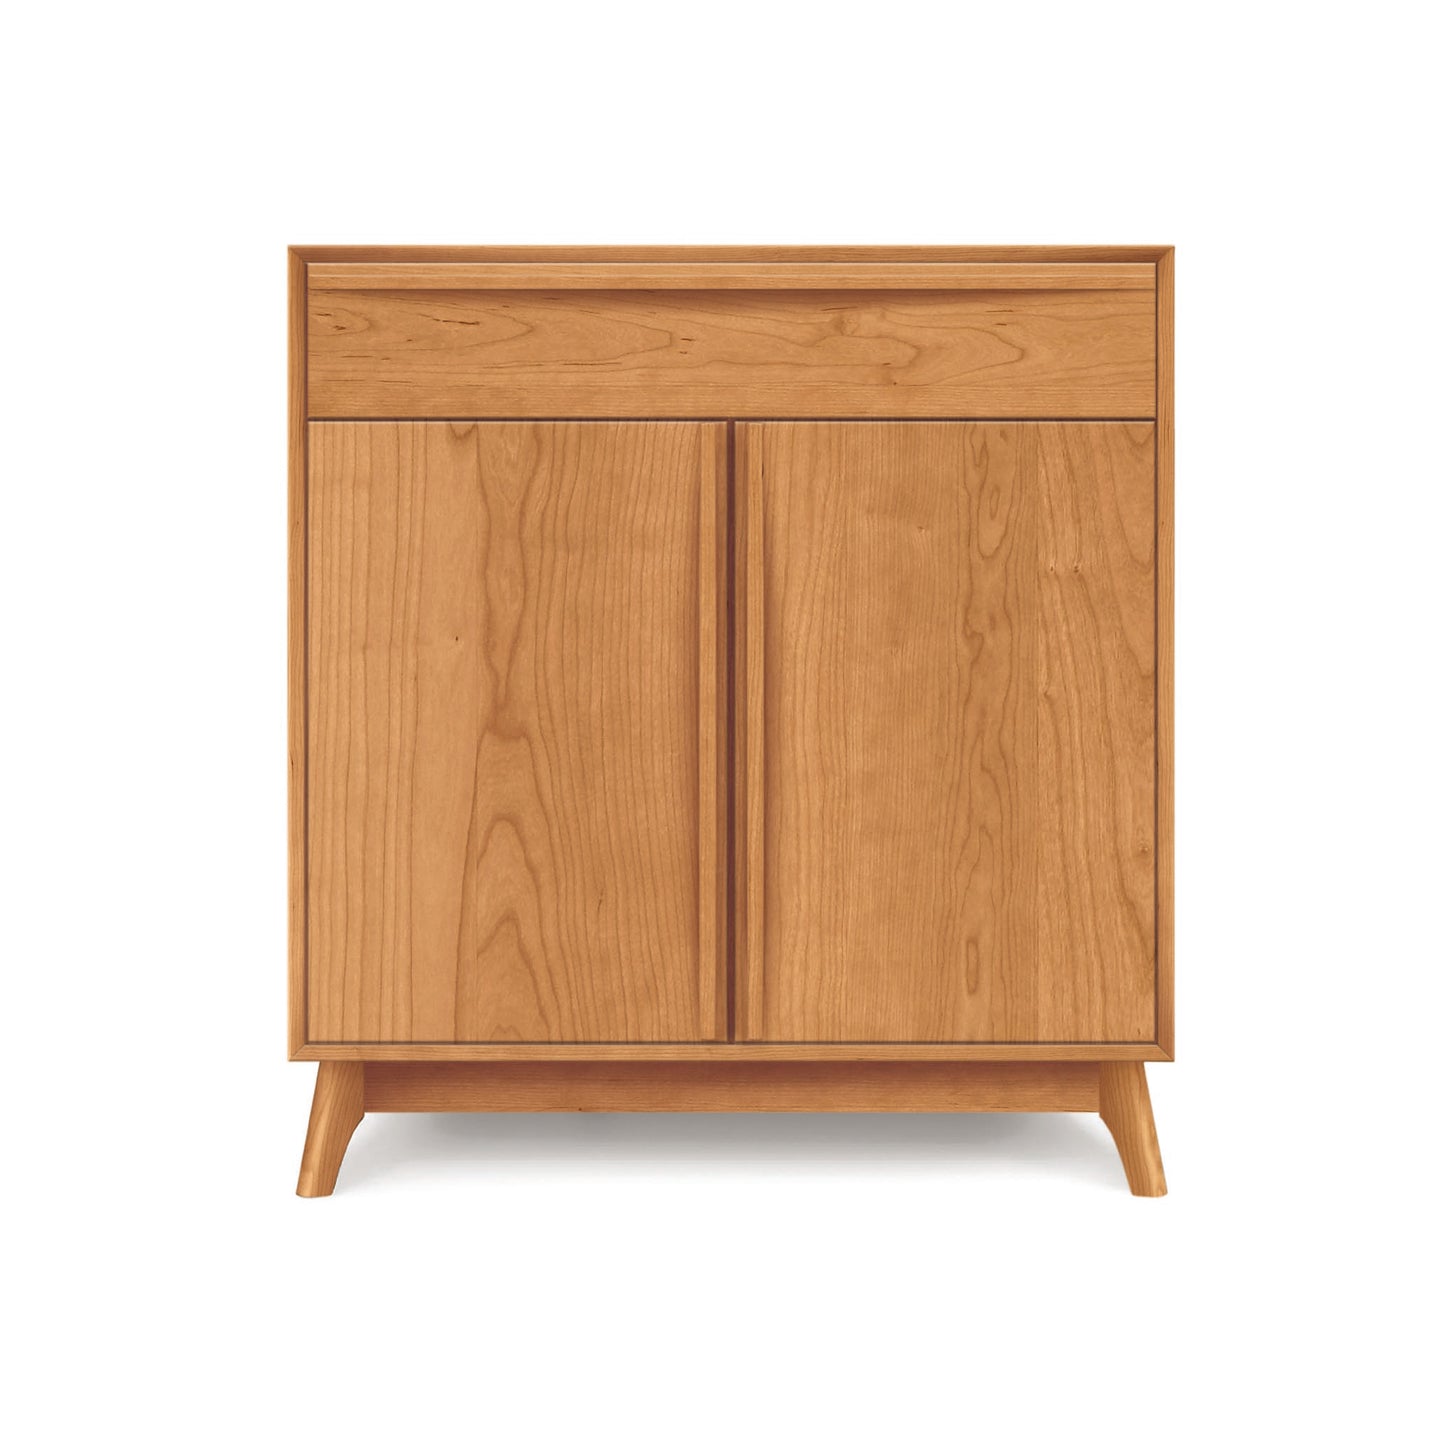 A Catalina 1-Drawer, 2-Door Buffet by Copeland Furniture with two doors on a plain background.